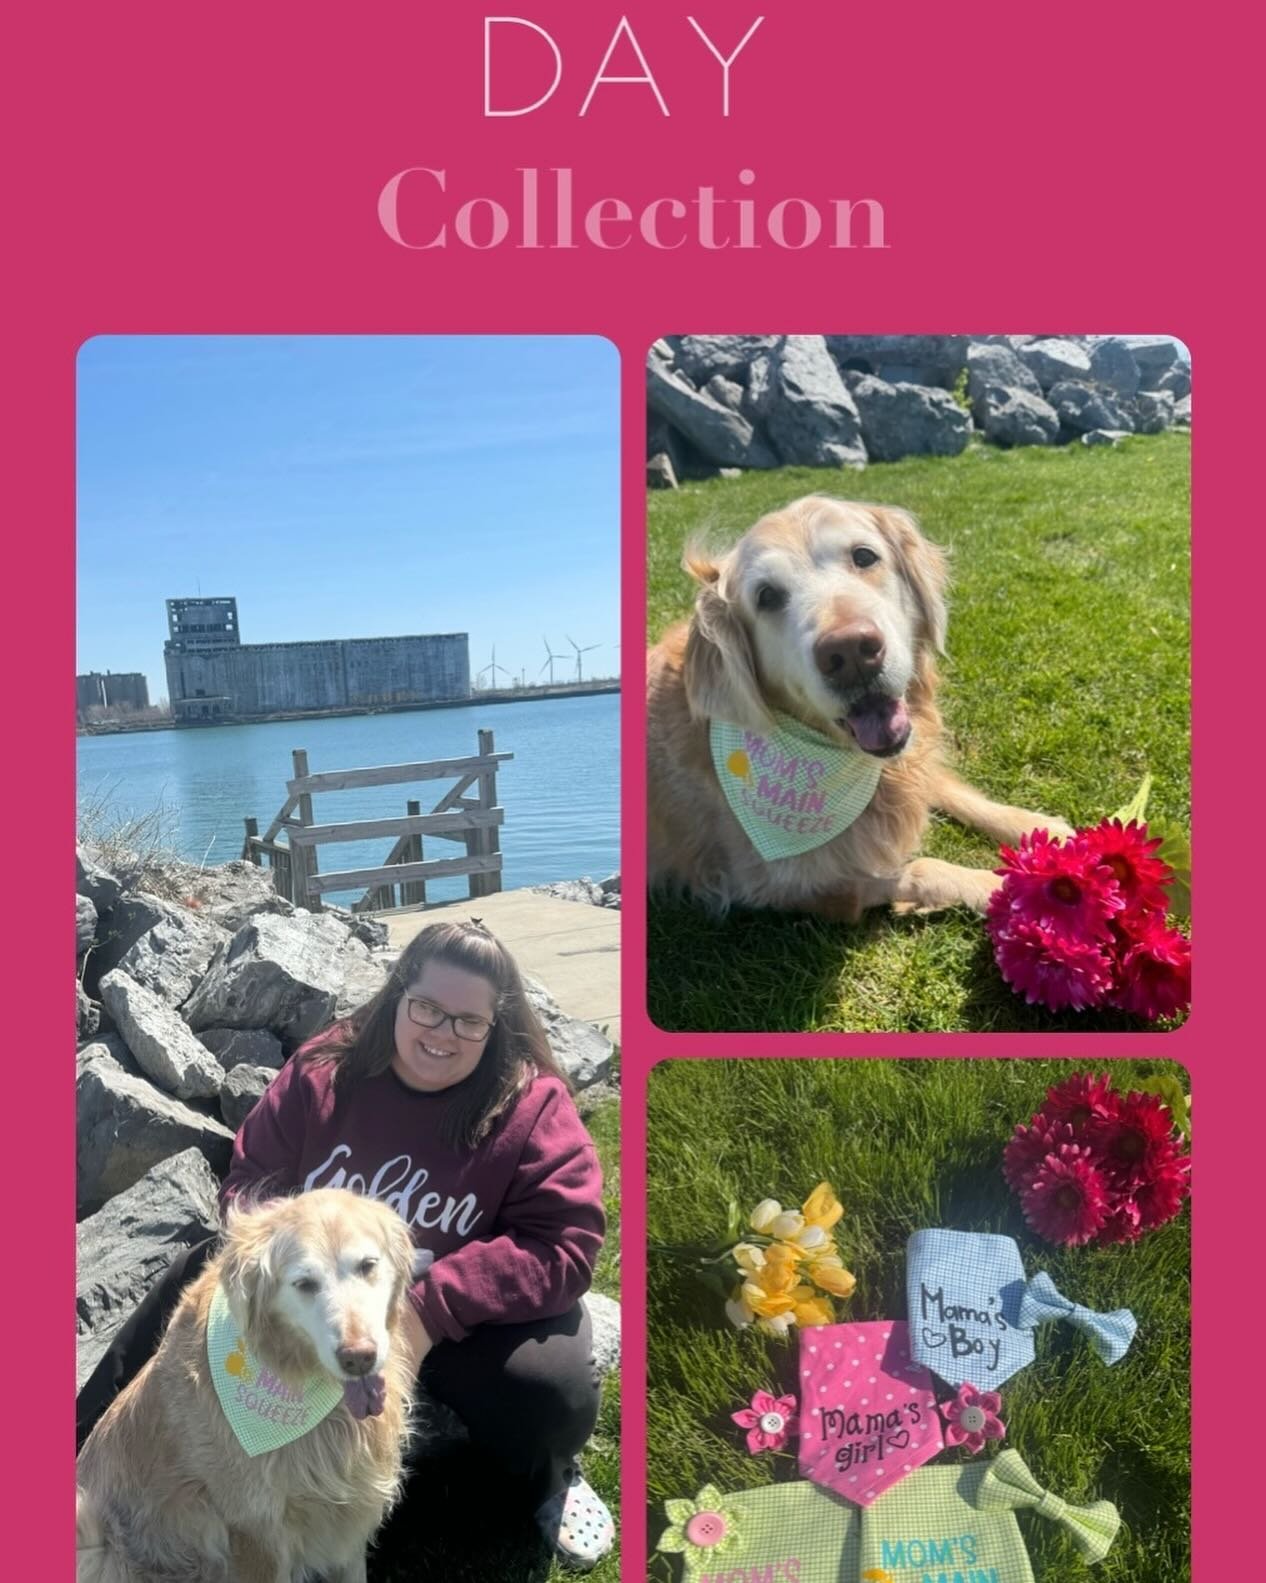 Don&rsquo;t forget to order your pups Mother&rsquo;s Day bandannas! We can ship them out today for you! 🌷🐾💕 Shop here: www.comfybanditsandmore.com

We will also have these available tomorrow at the @buffalo.holiday.market chalets from 11-6! 

#dog